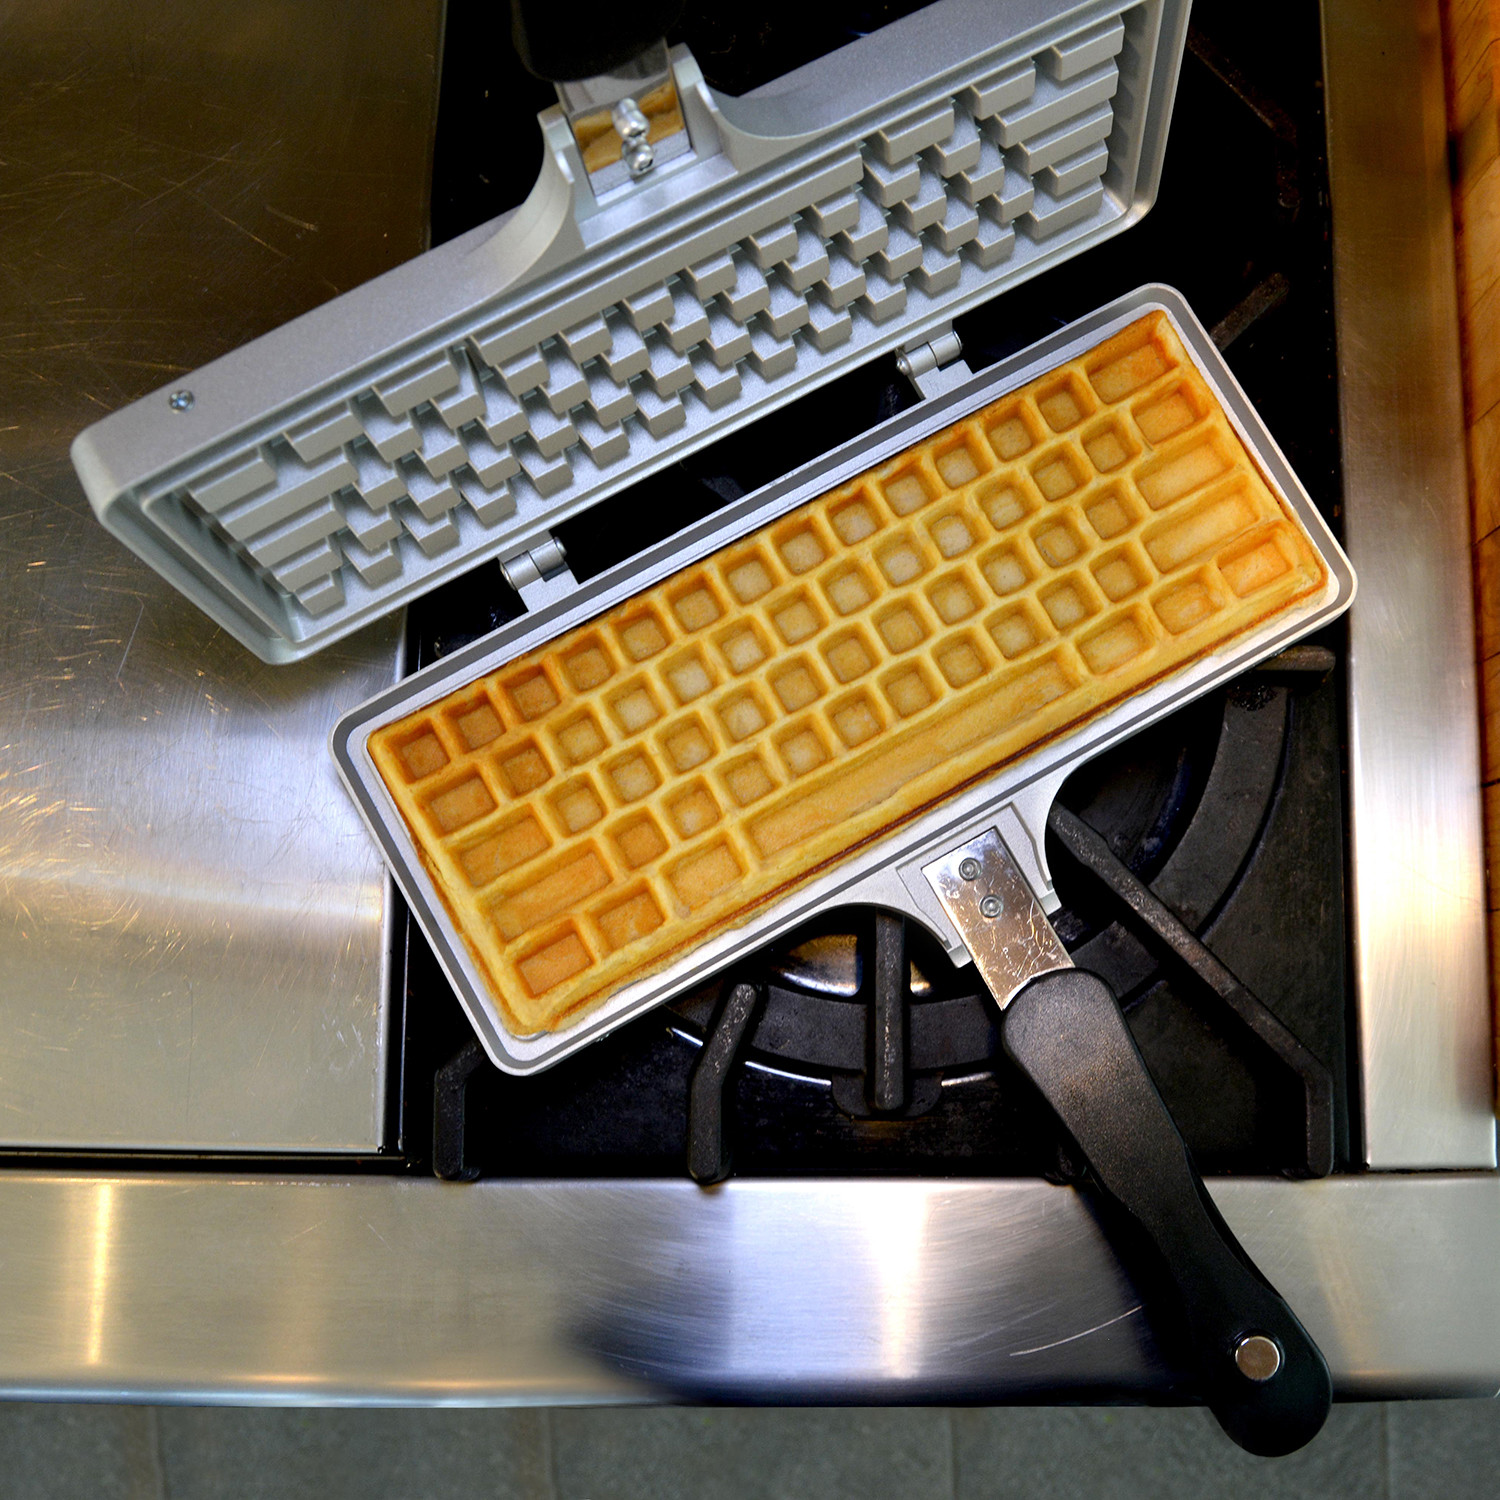 The Keyboard Waffle Iron - The Keyboard Waffle Iron - Touch of Modern